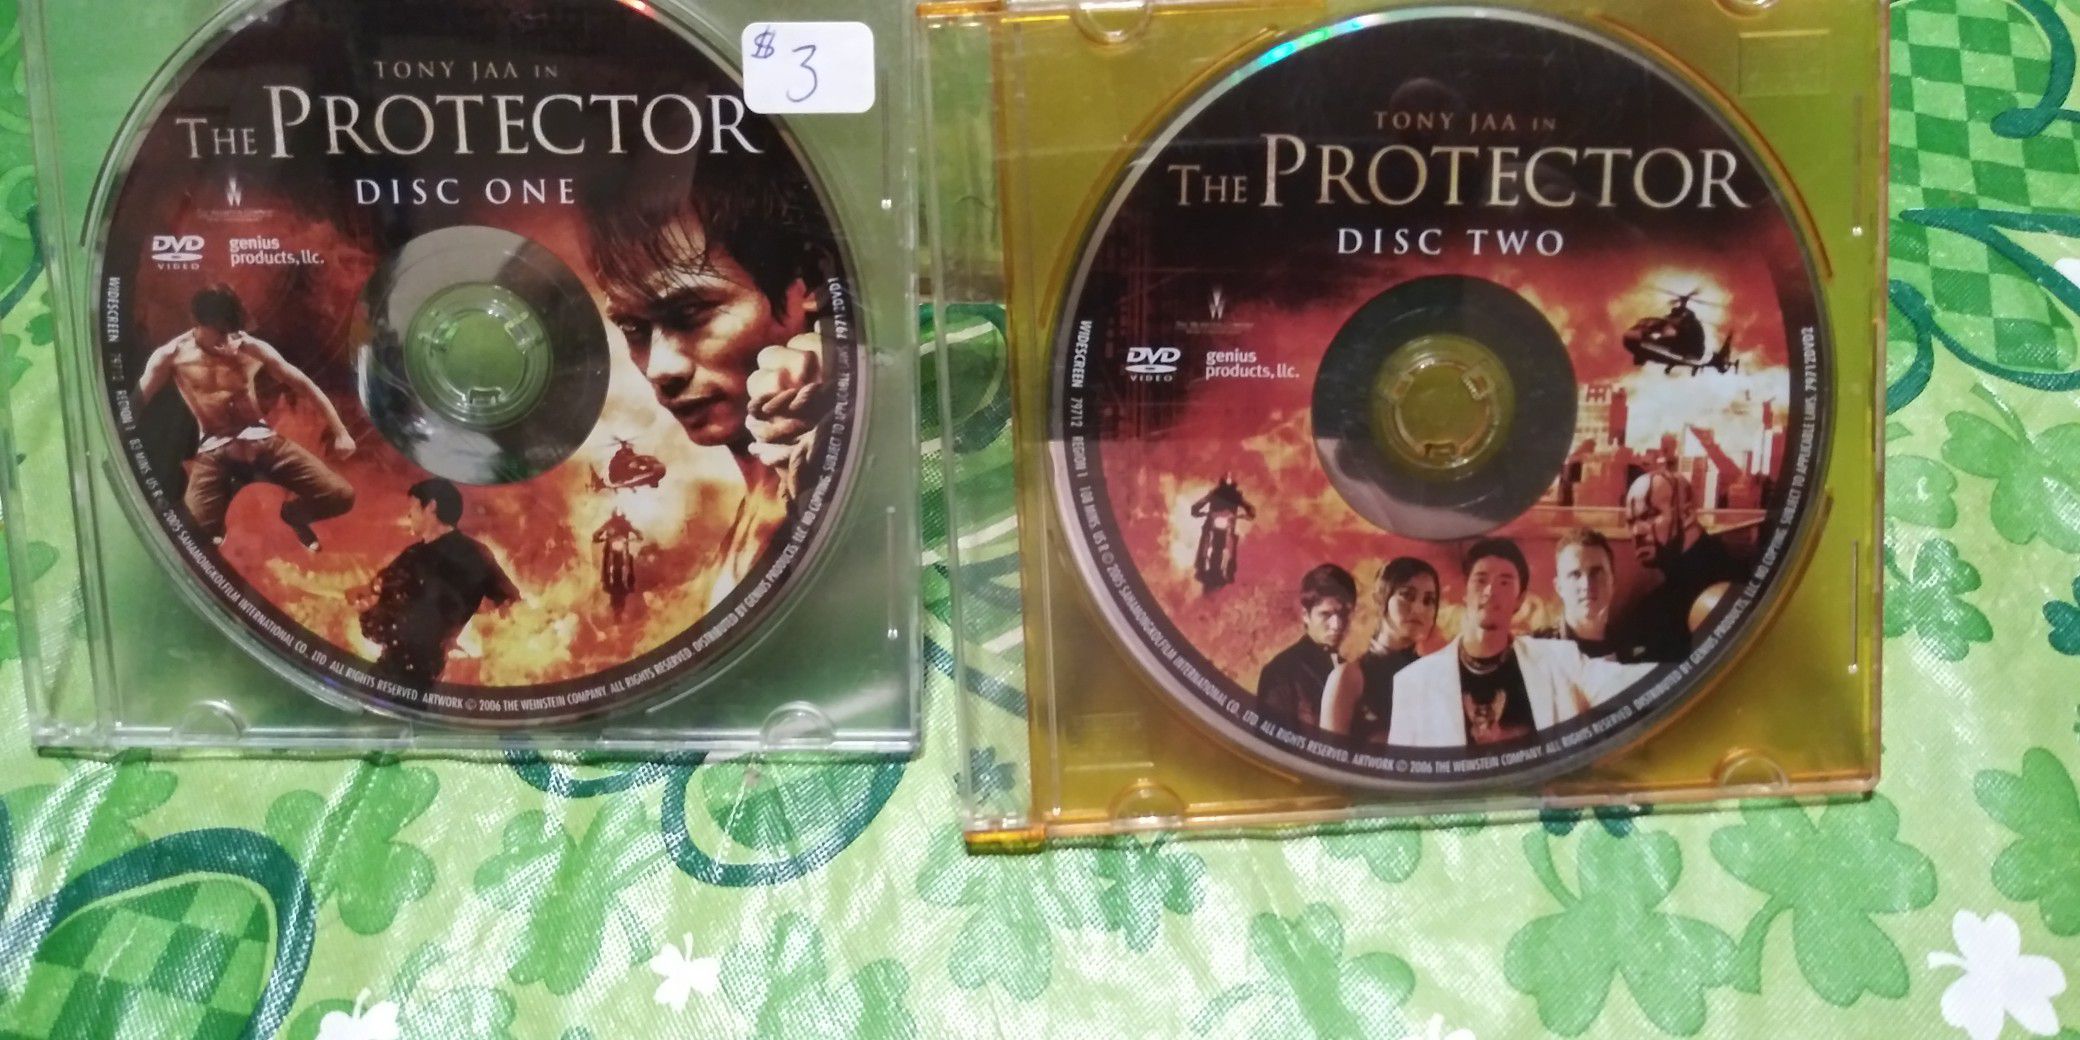 The Protector disc 1 & 2 dvds